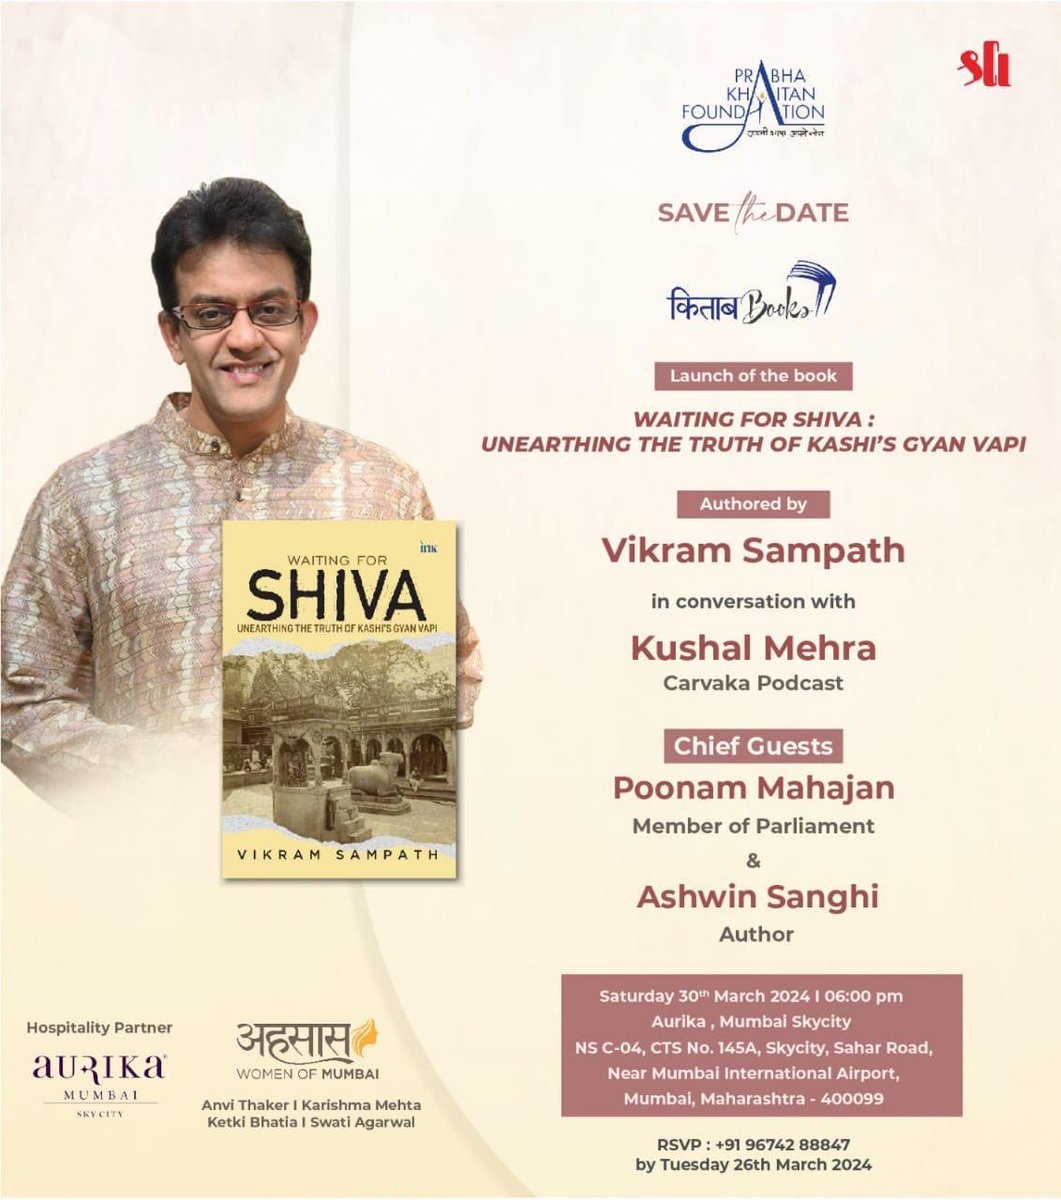 I'm really looking forward to moderate this session tomorrow for @vikramsampath book 'Waiting for Shiva' along with my friends @poonam_mahajan and @ashwinsanghi Do join us as we discuss Vikram's book applying a range of prisms/lenses with our esteemed chief guests.